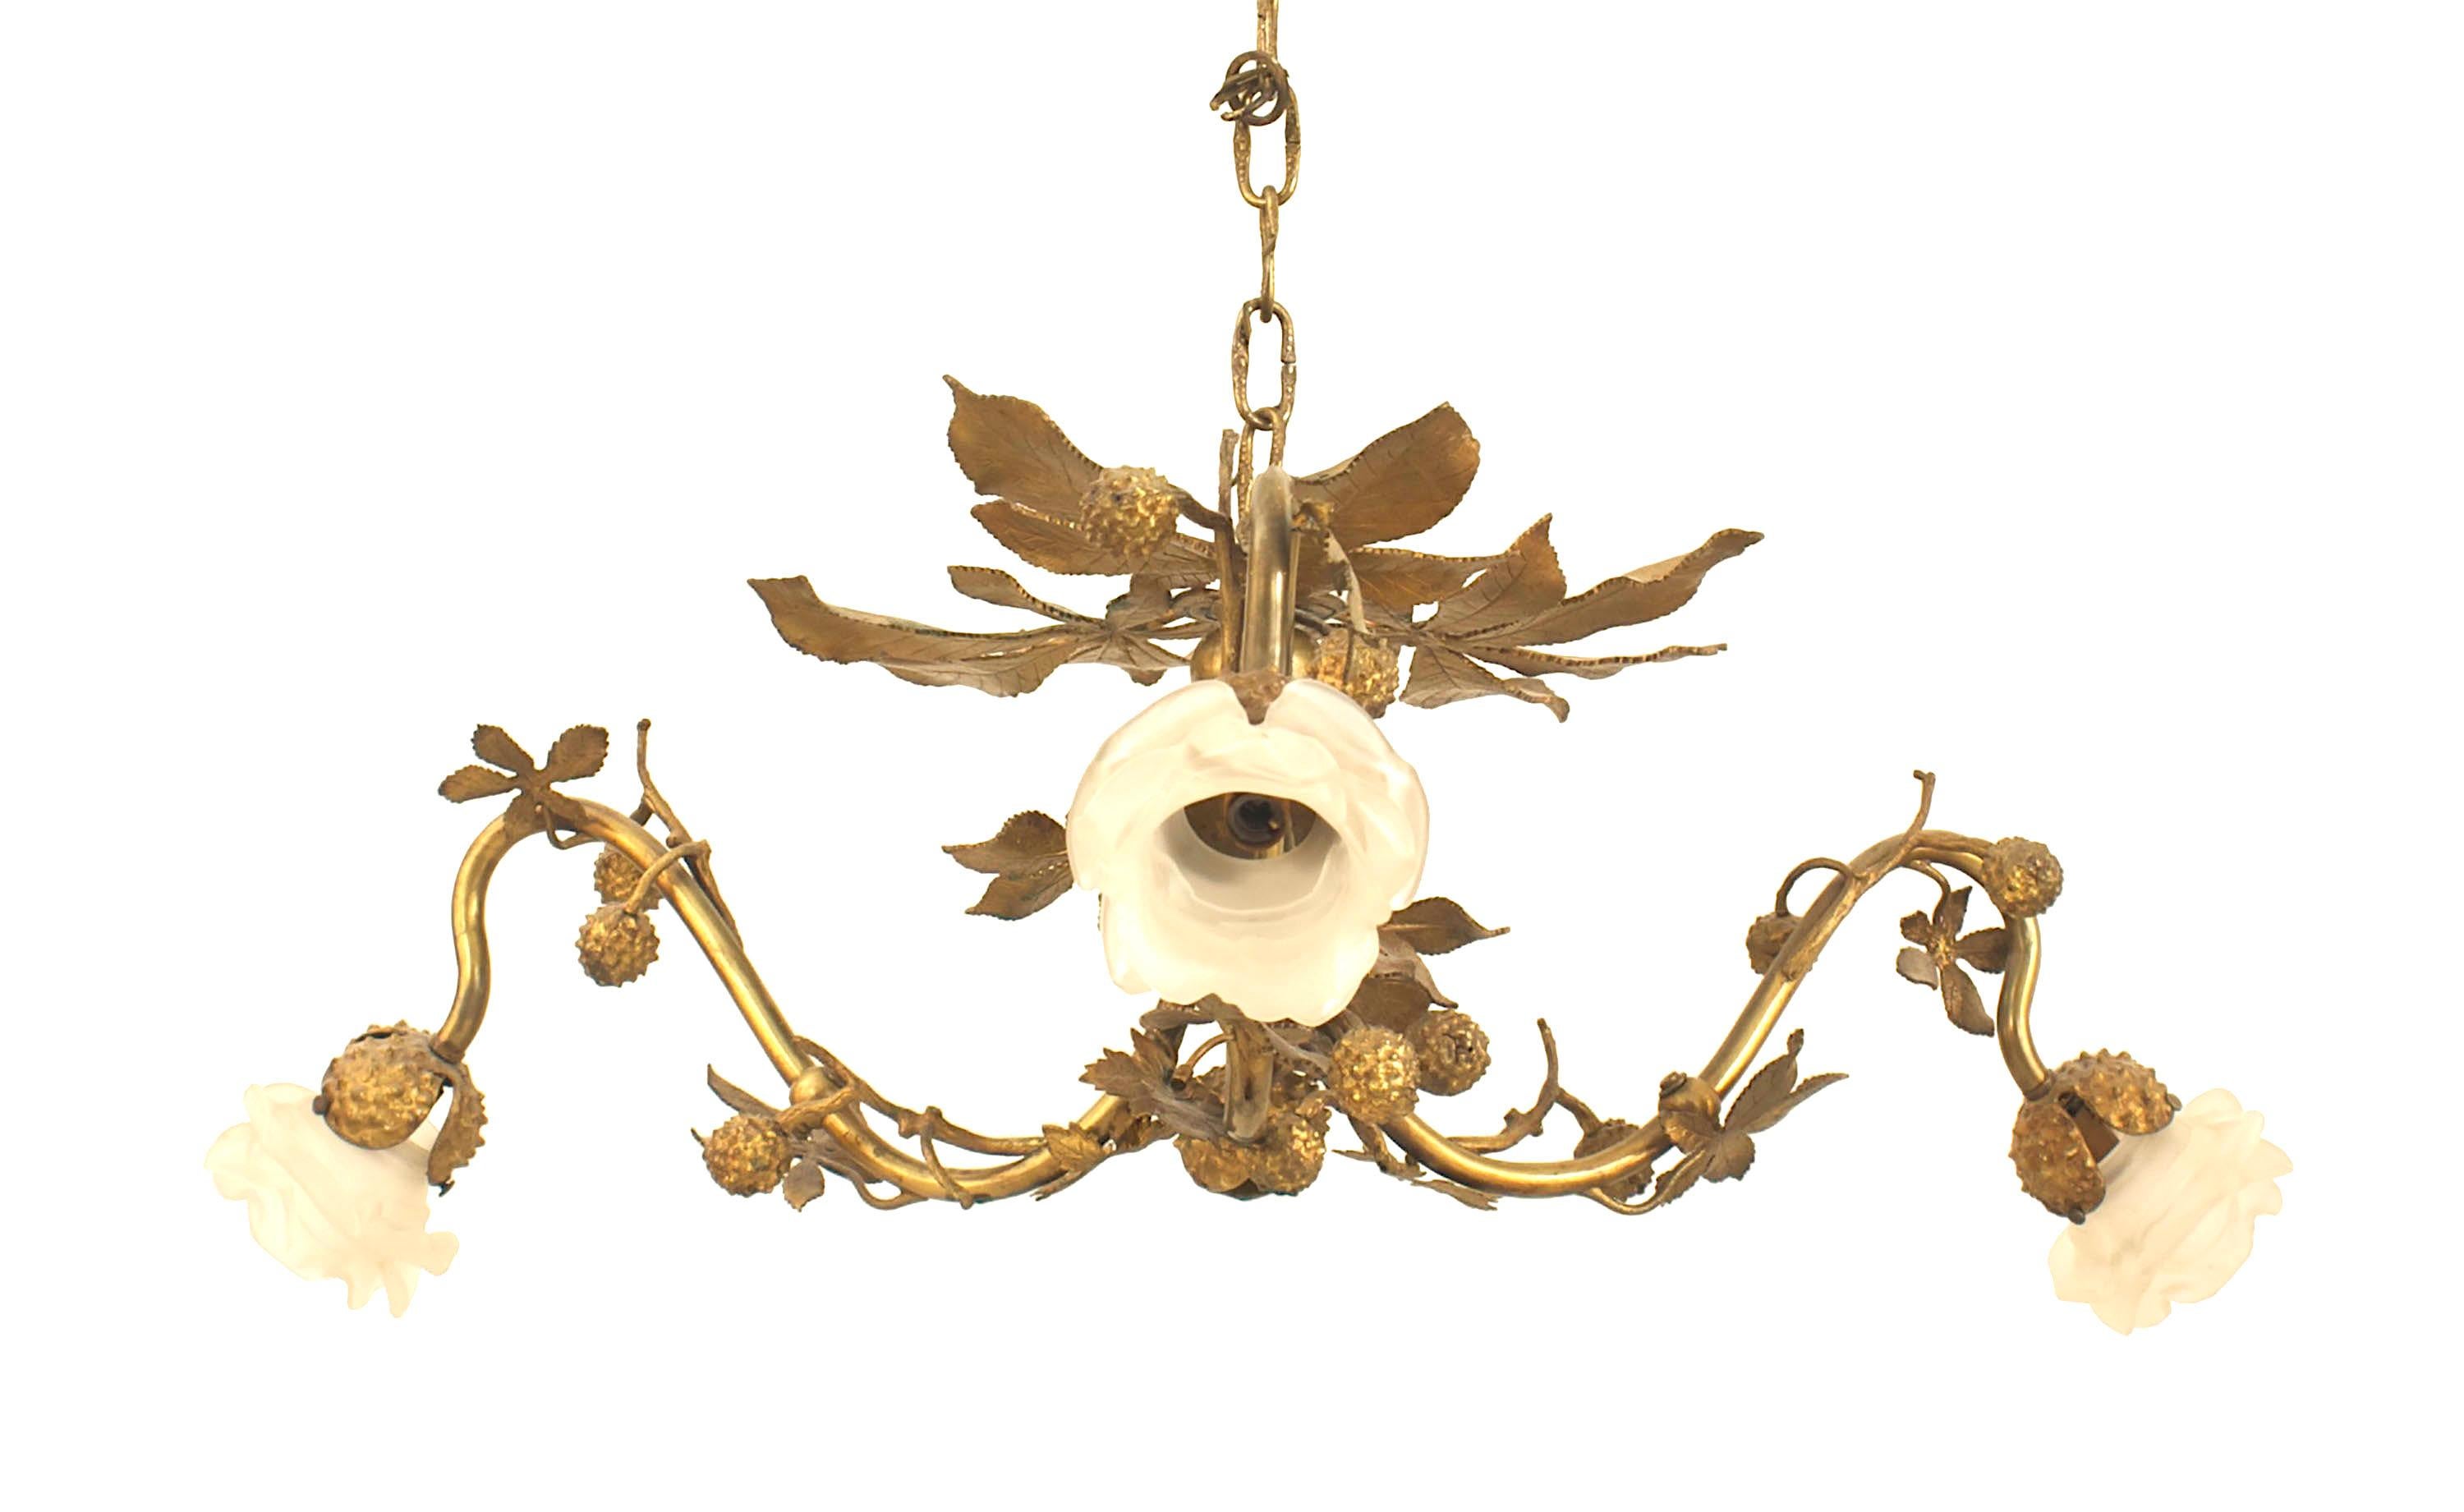 Art Nouveau-style gilt metal rustic style chandelier with 3 arms having design of leaves and berries with 3 frosted glass flower shades.
